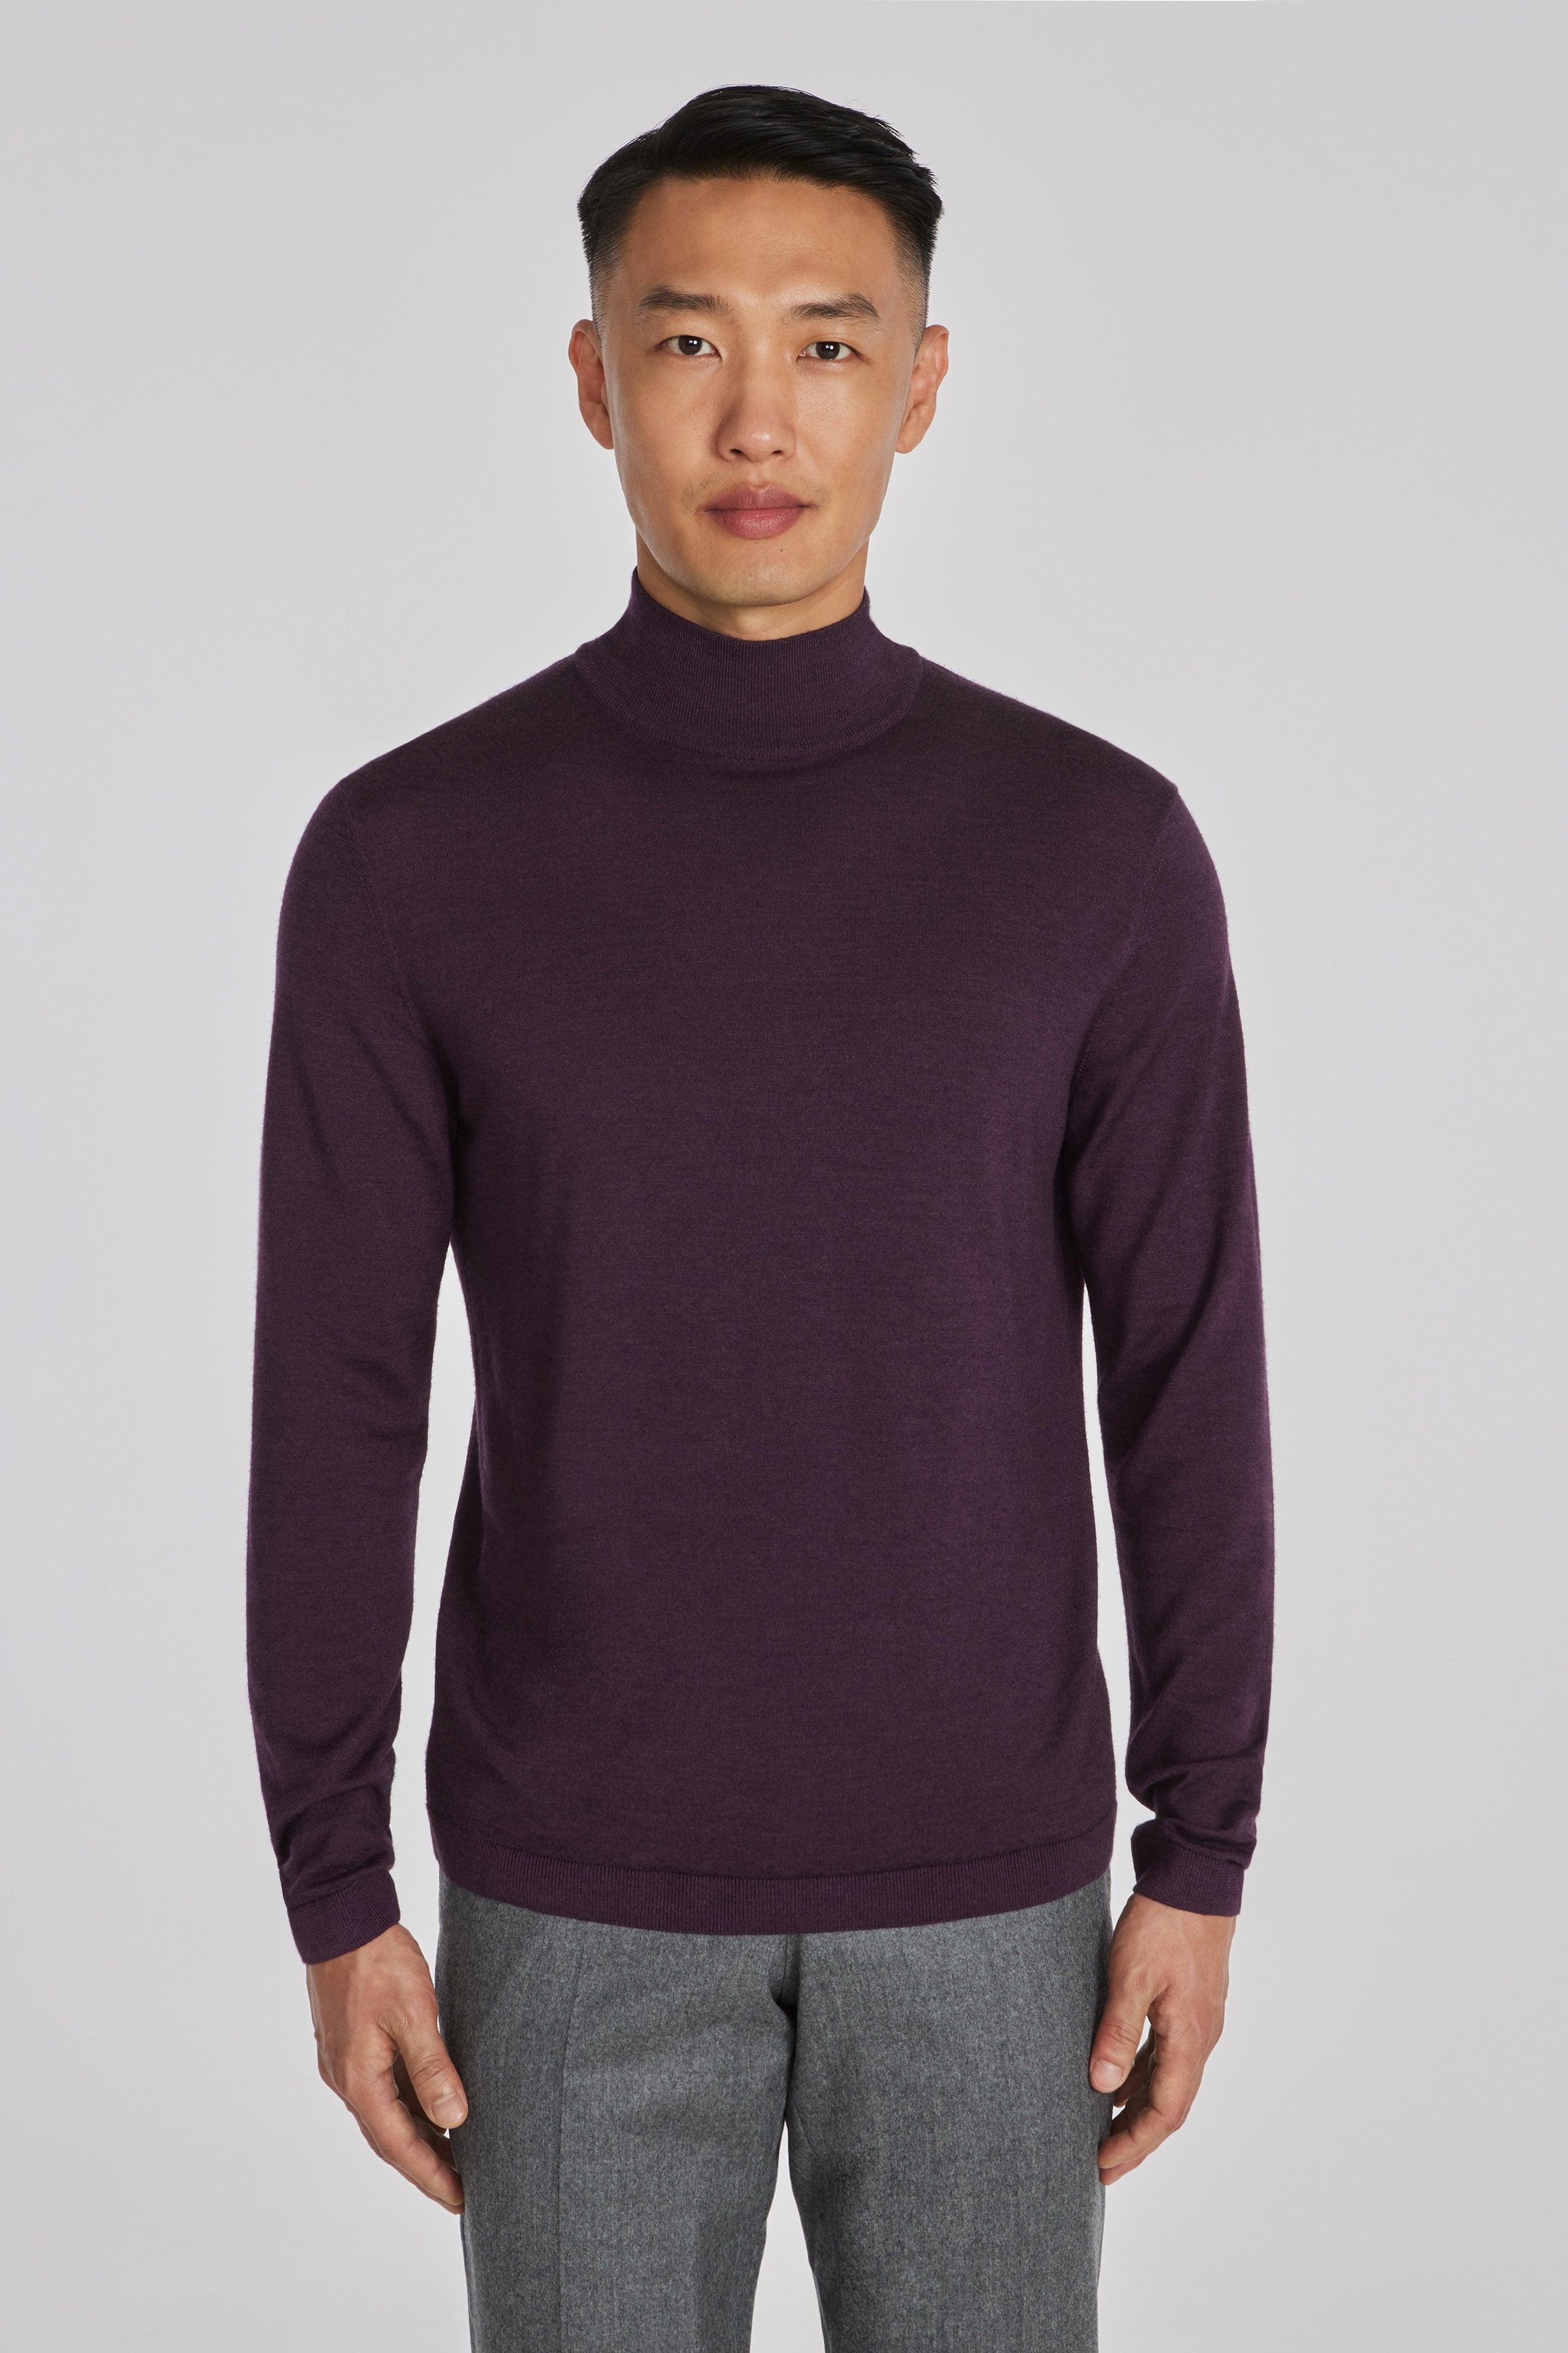 Alt view Beaudry Wool, Silk and Cashmere Mock Neck Sweater in Plum